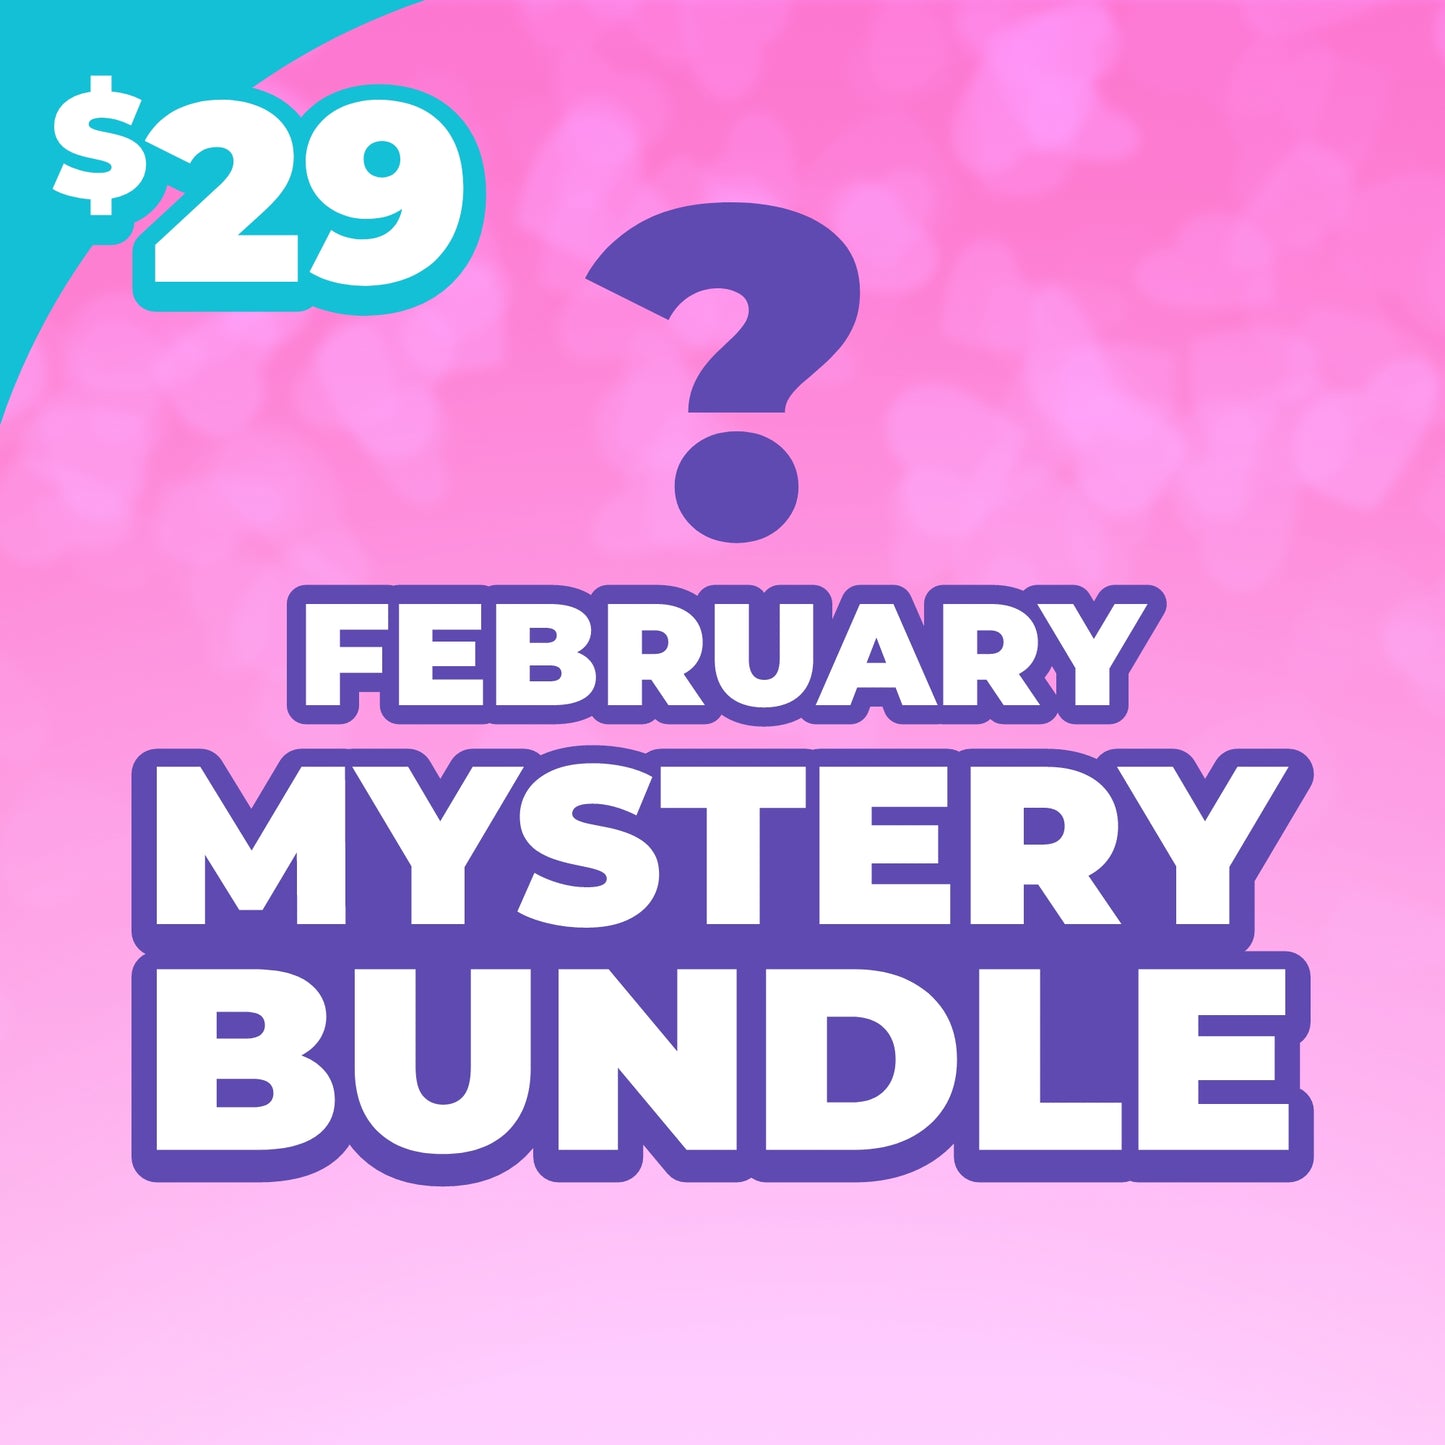 The pink February Mystery Bundle graphic has purple text and a teal $29 call out in the top left corner